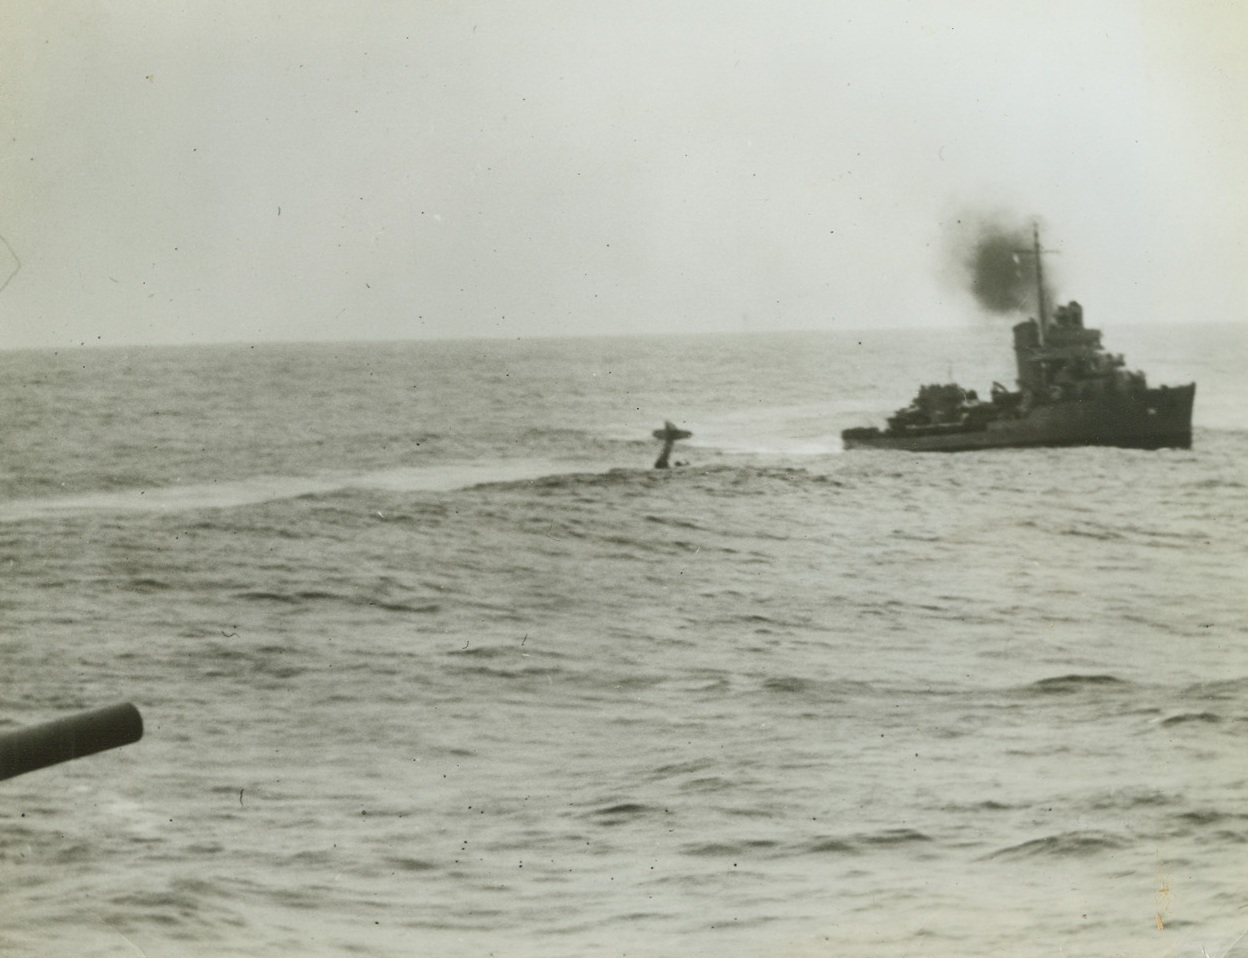 Flyers Take Dunking, 11/4/1942. A destroyer maneuvers to rescue the crew of a U.S. Navy plane which missed its landing on the carrier belonging to gun at extreme left. The airmen are barely discernible at right of plane. Credit: Official U.S. Navy photo from Acme;